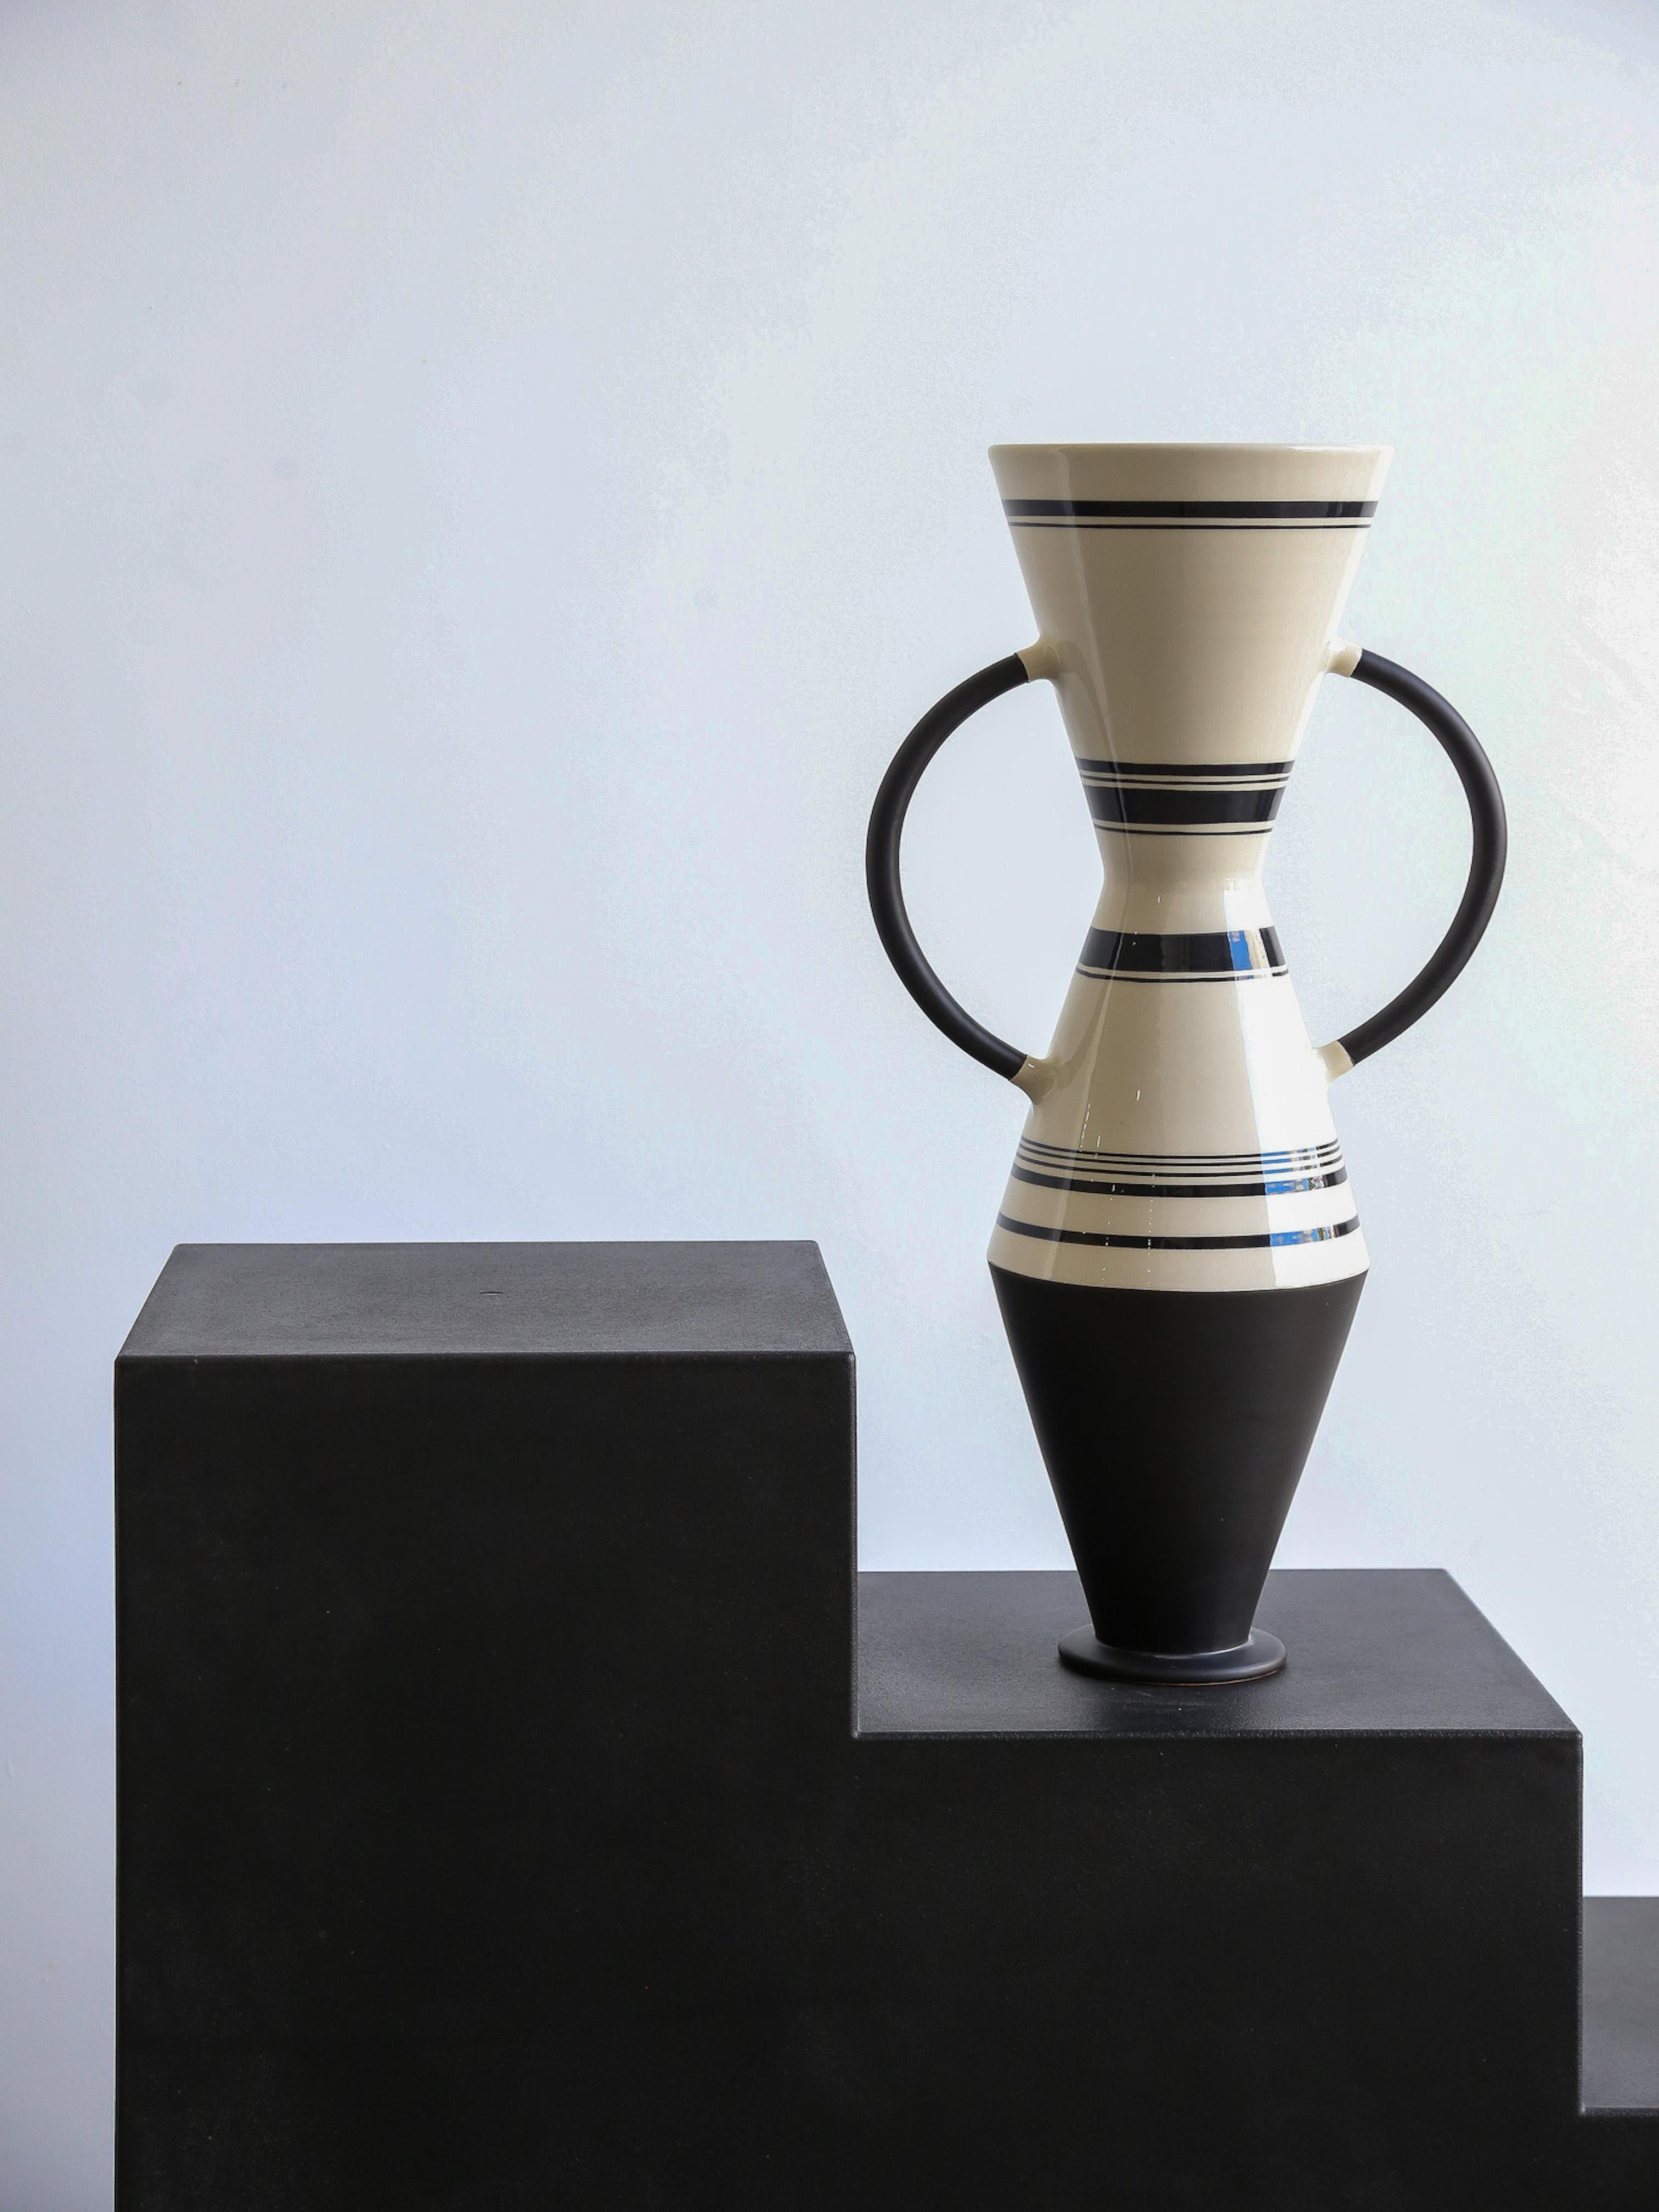 Conical and spheroidal vases play with lines and crosses in a black and white ritual. Clay vase, hand thrown, with clay handles. Matte black glaze finish for the base and handles, white engobe decorated black with transparent glaze for the